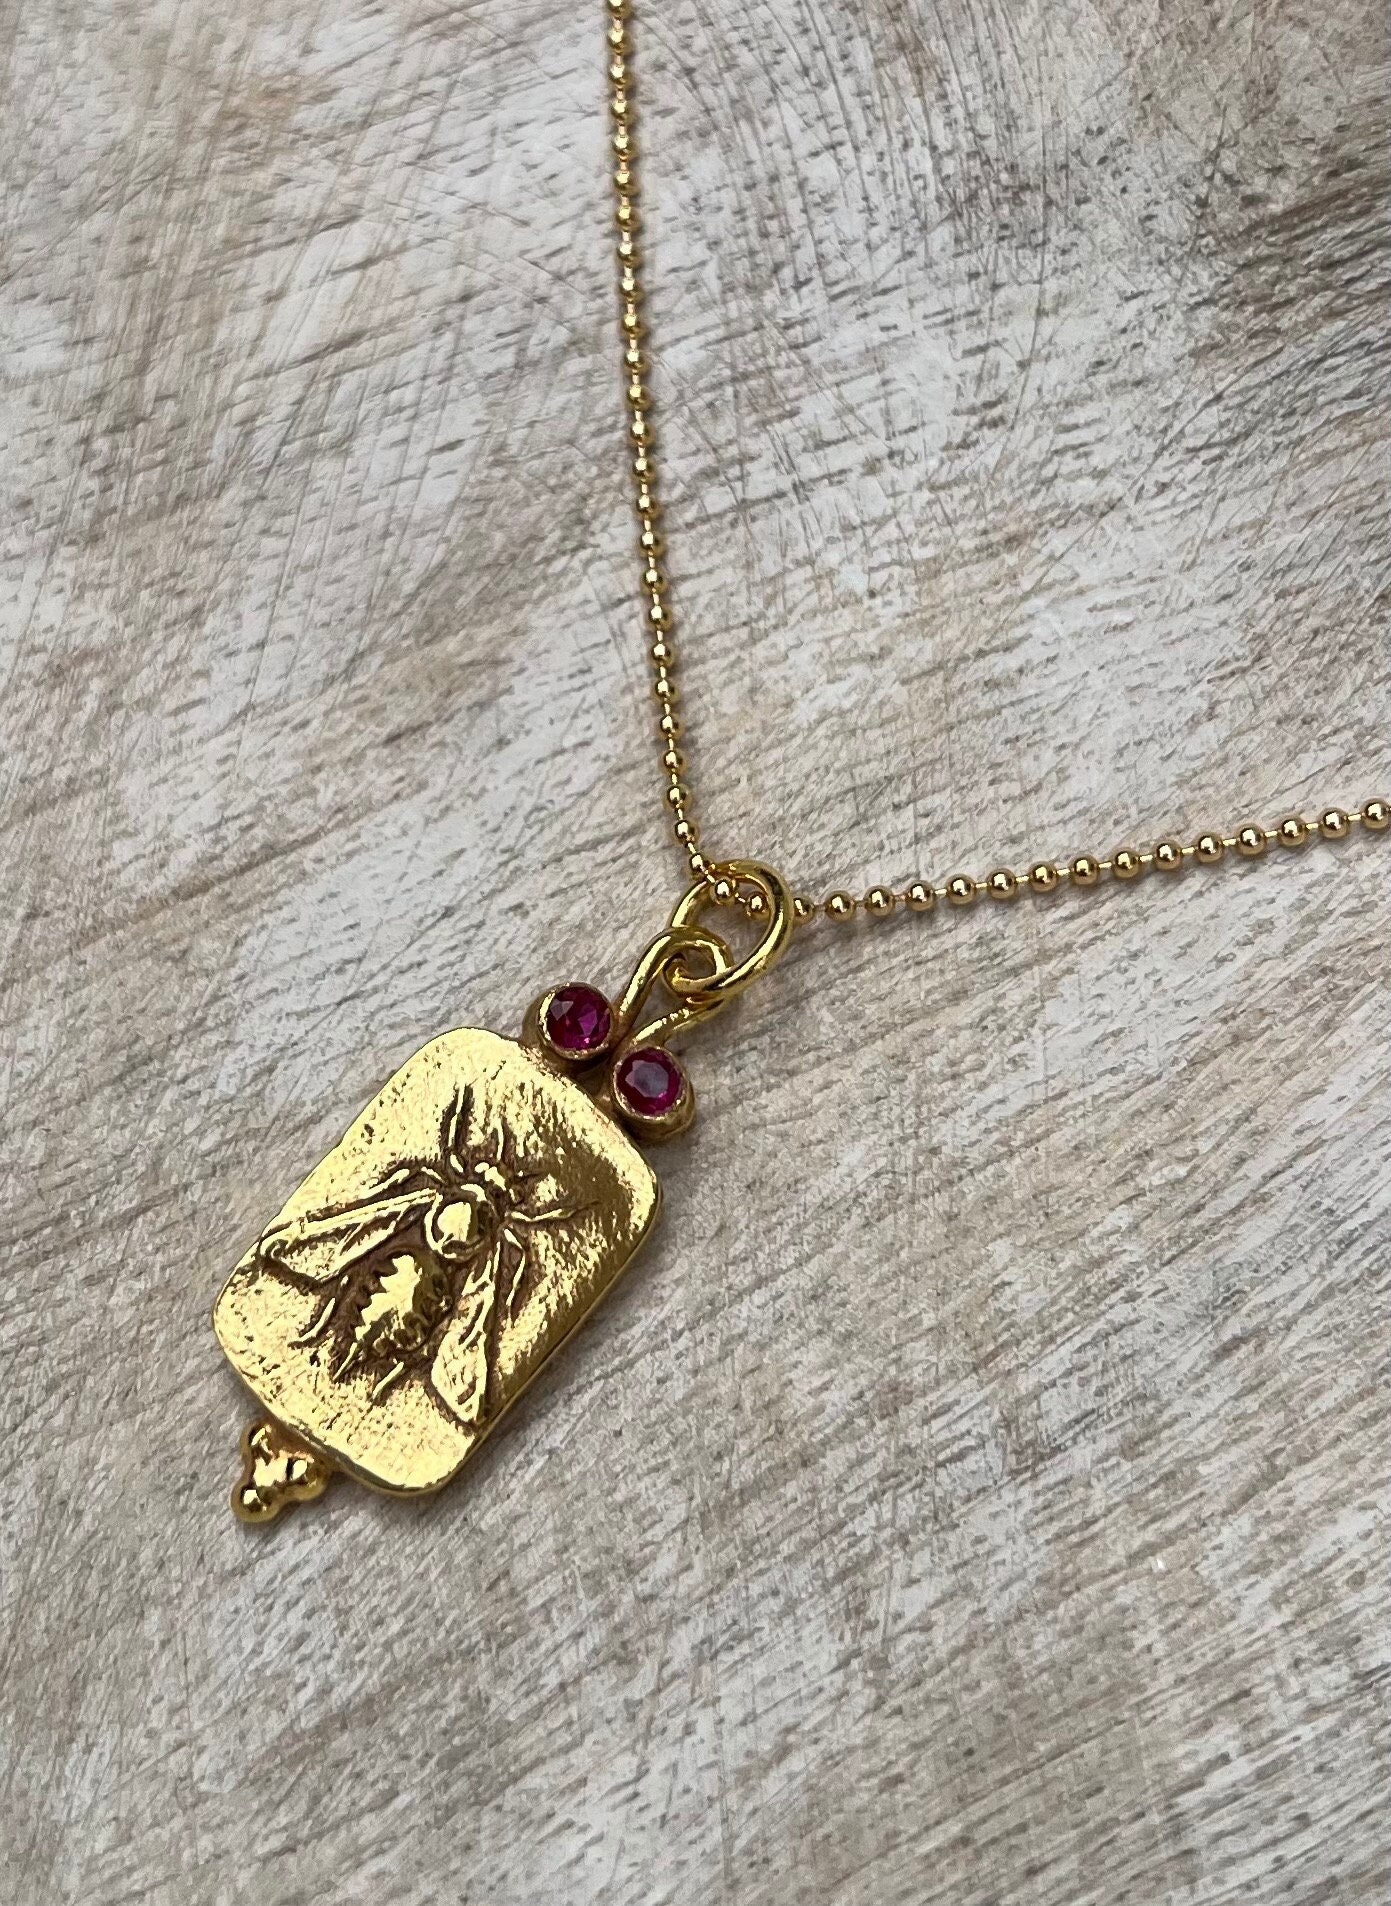 Bee Necklace Handmade Necklace Intaglio Pendant Necklace Gold Vermeil  Pendant Gold Filled Necklace Valentine Gift for Her Bee Pendant - Etsy